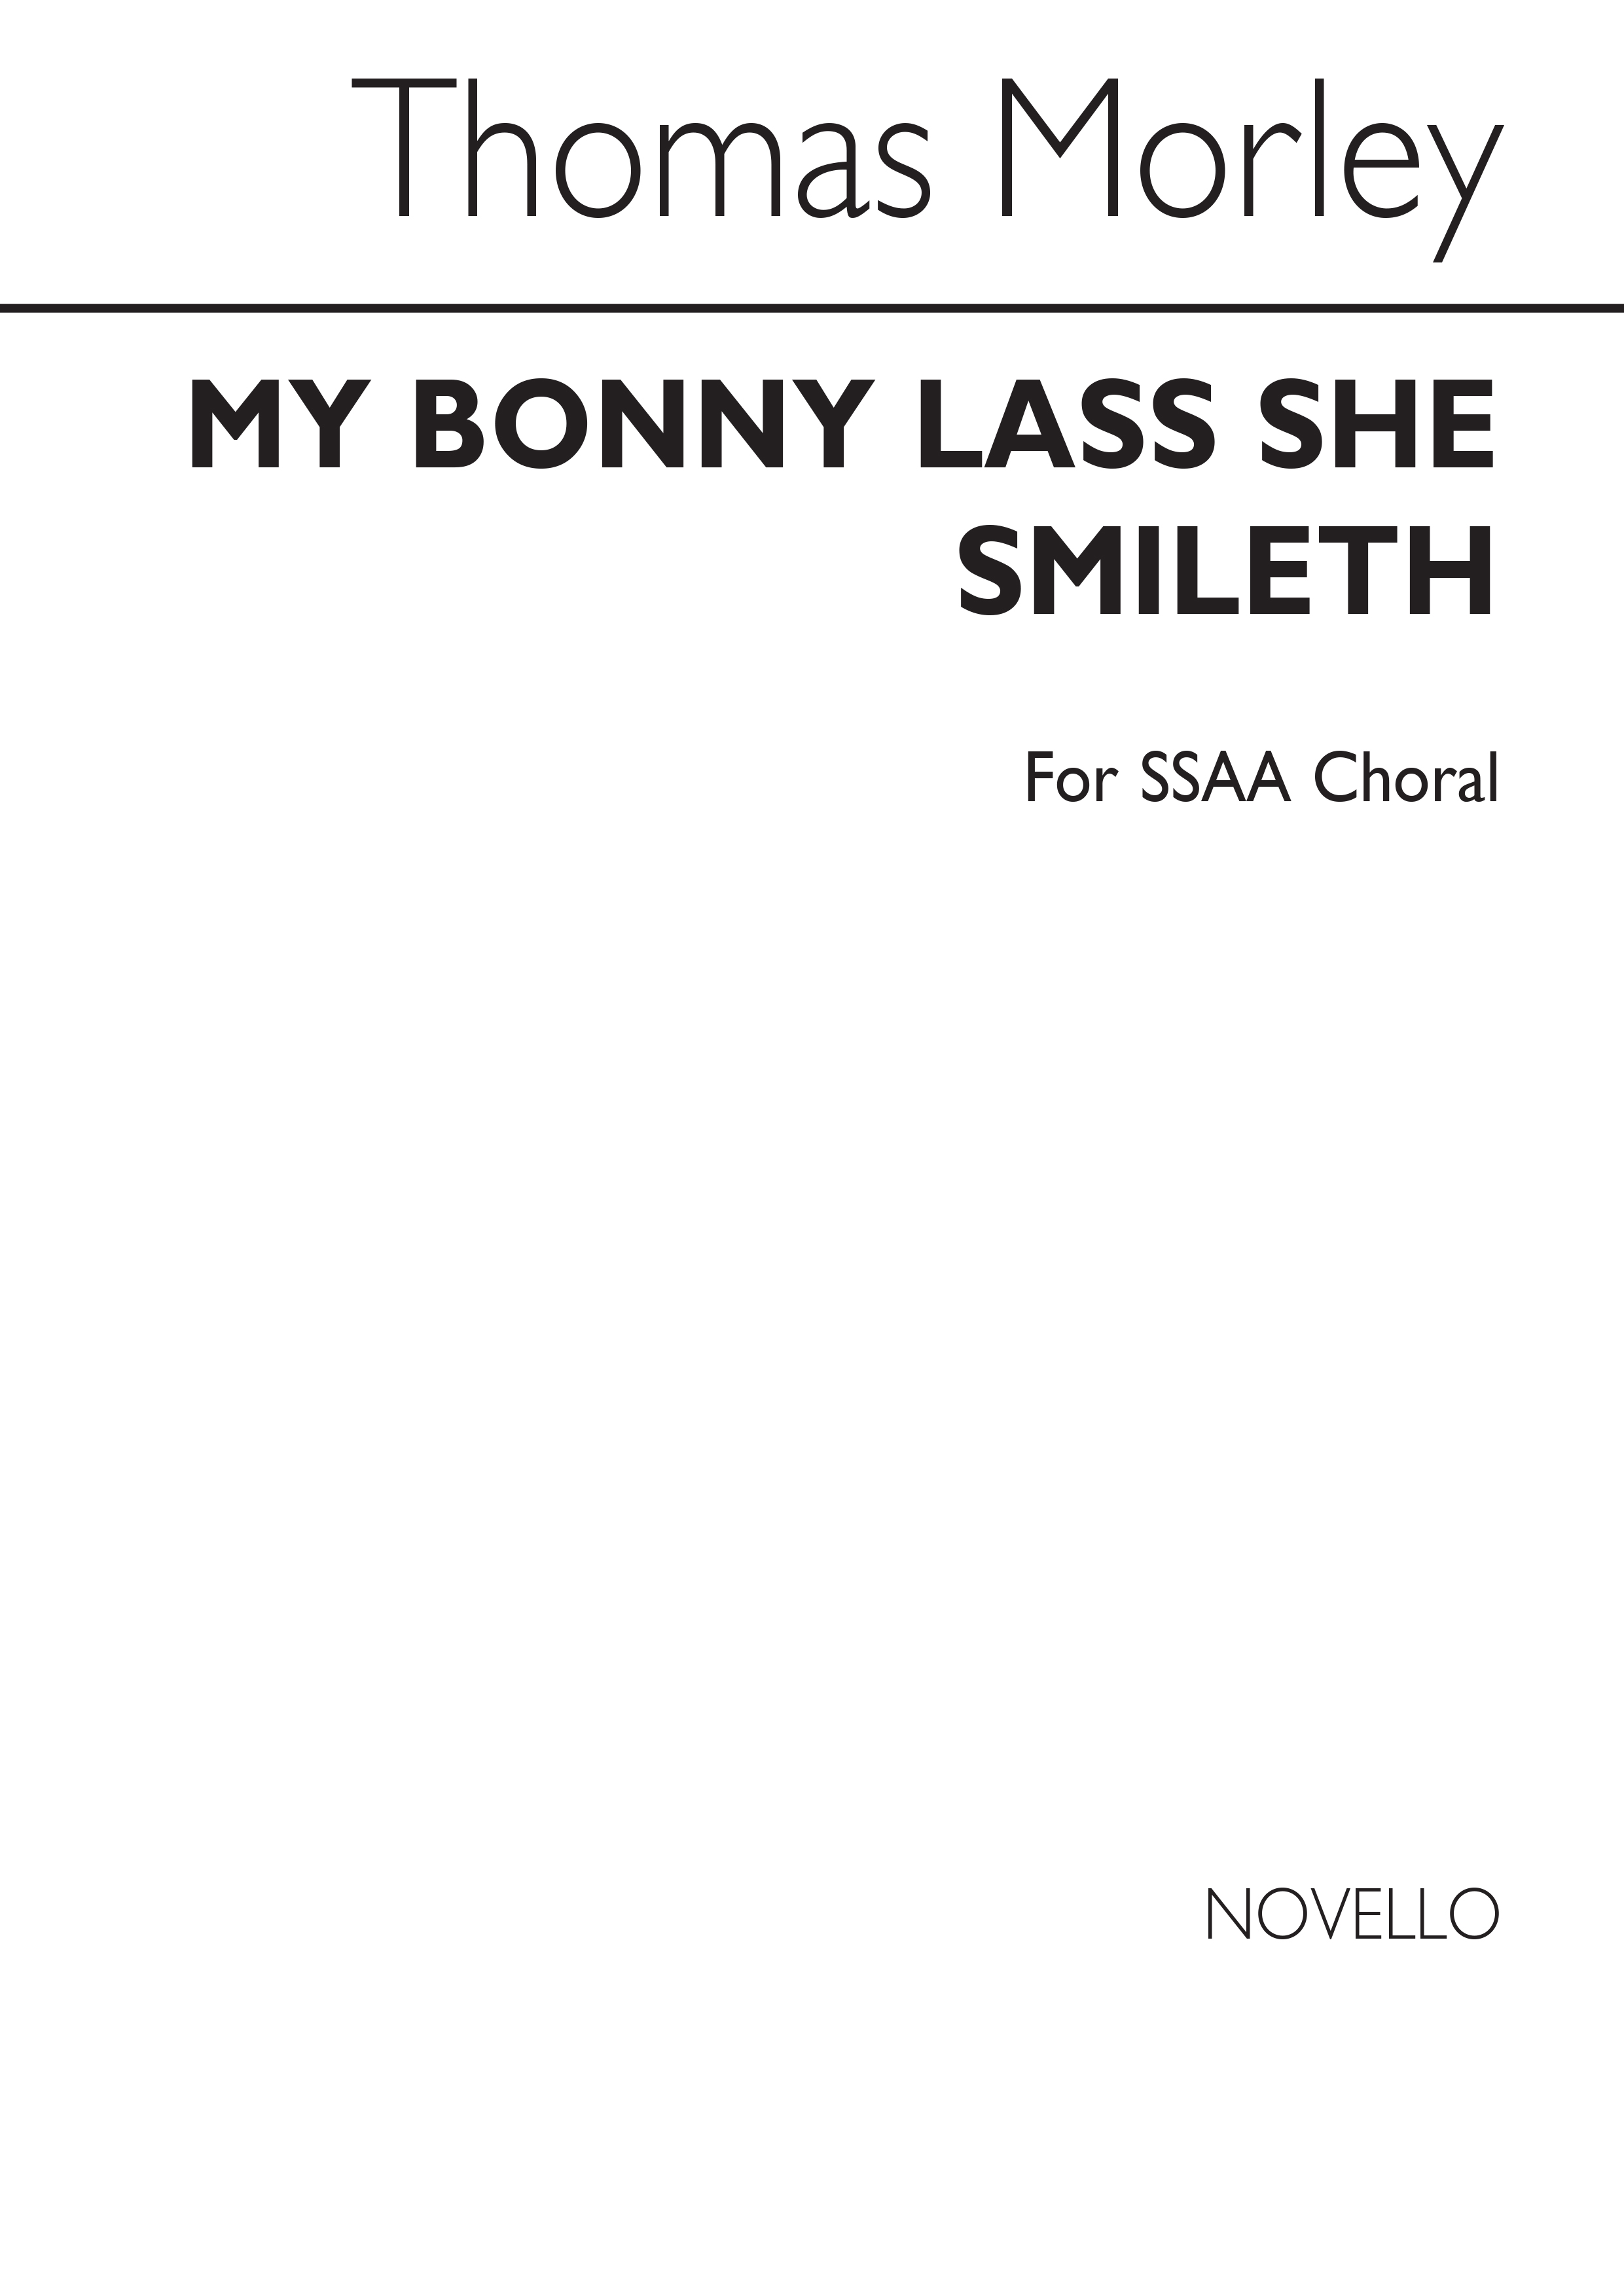 Morley, T My Bonnie Lass She Smileth Ssaa